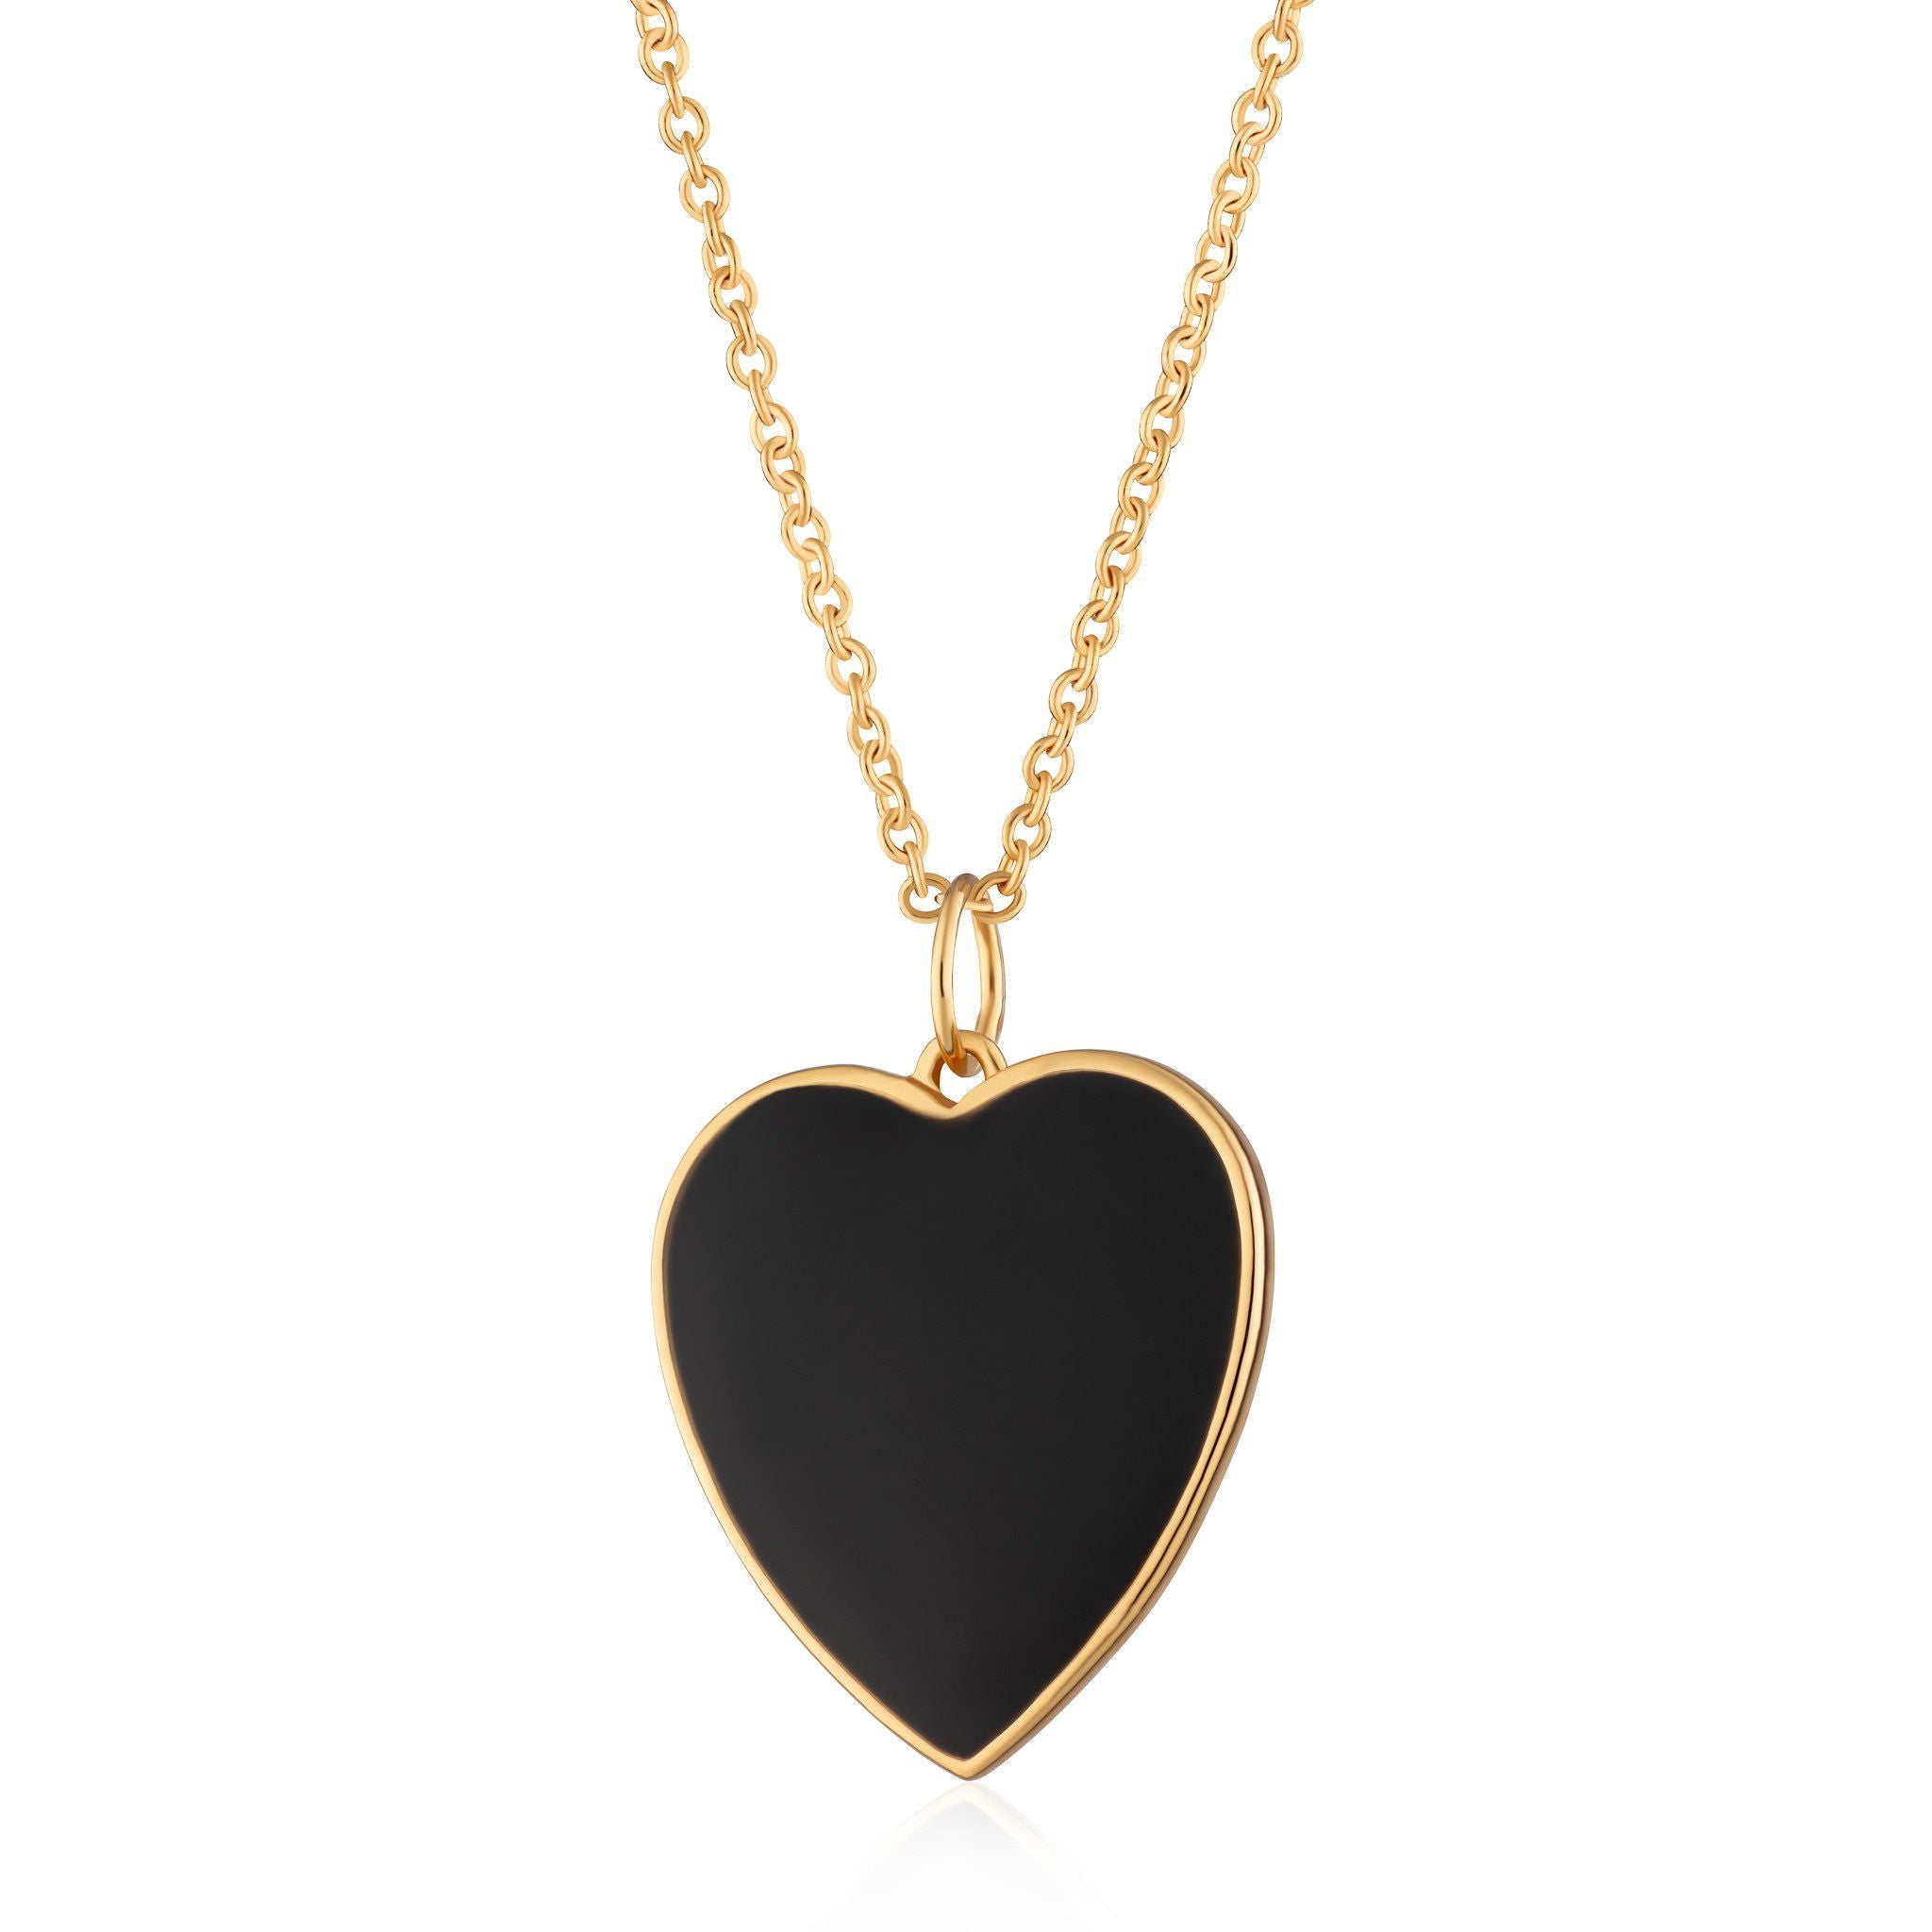 Black Heart Necklace with Slider Clasp